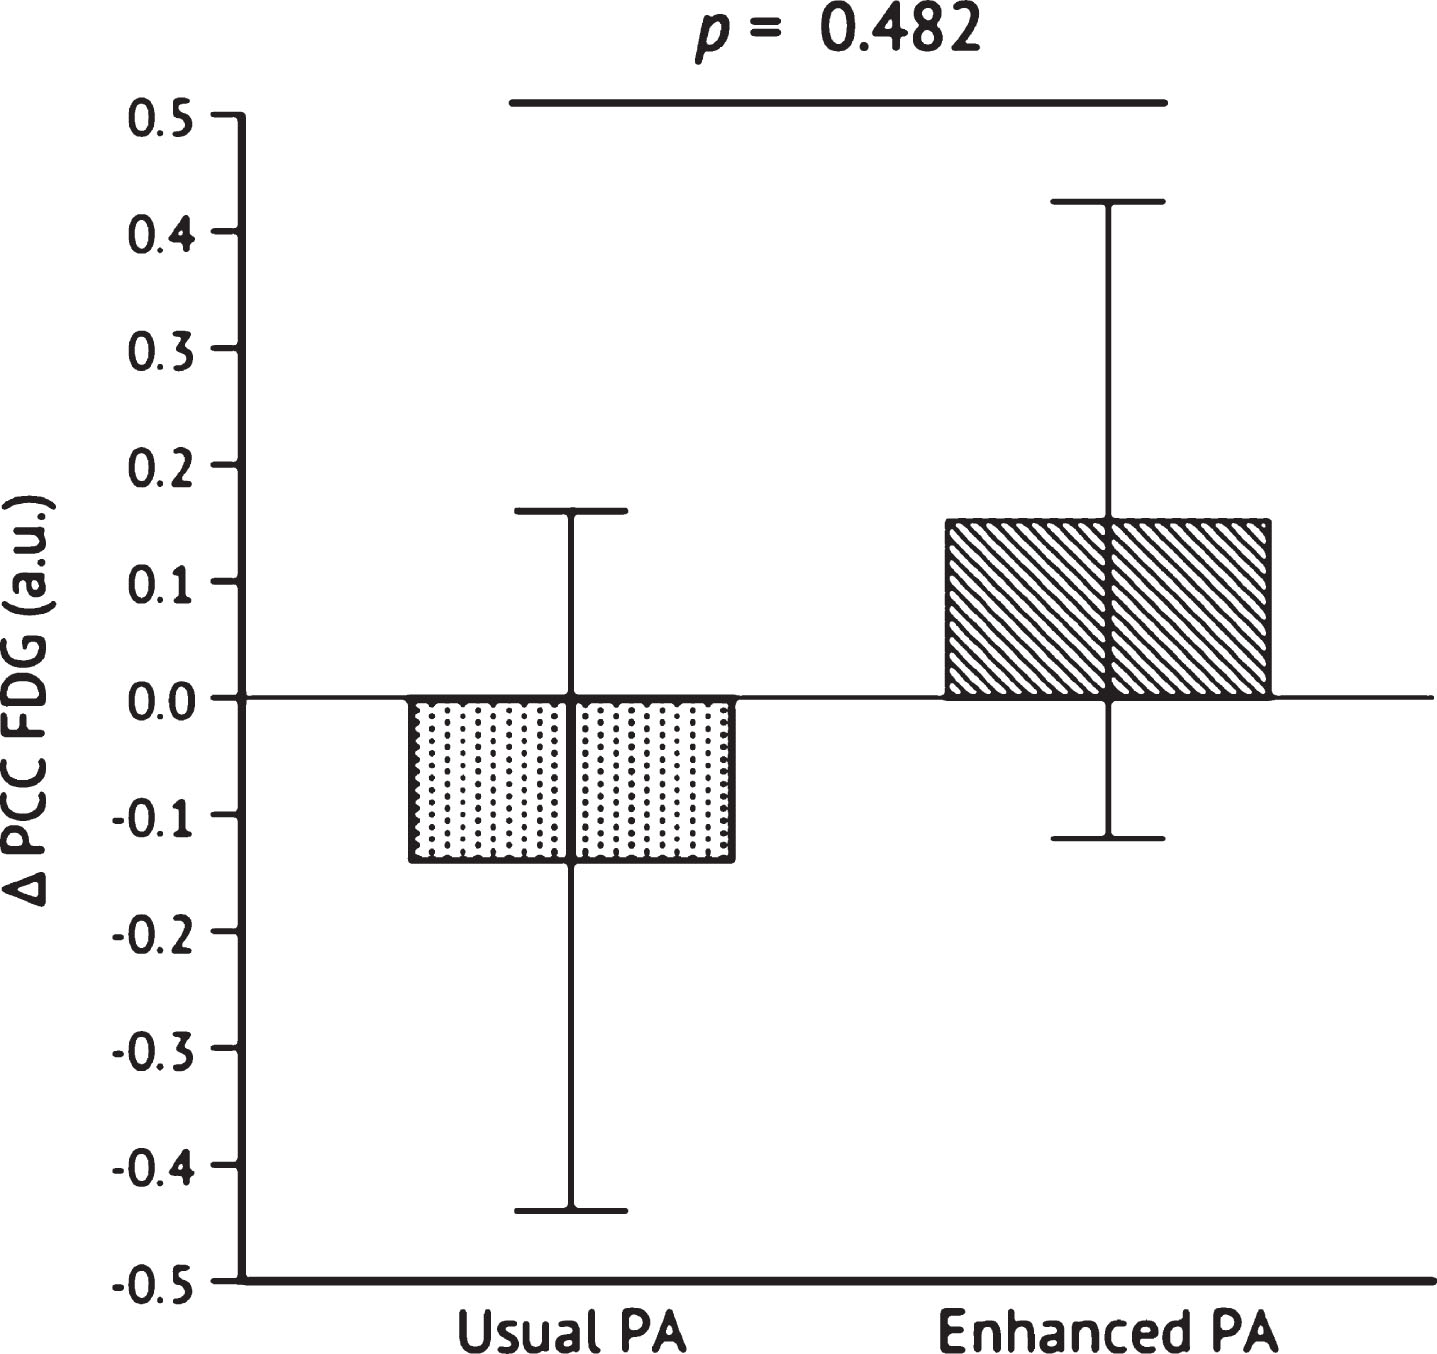 Change in PCC FDG uptake after the 26-week intervention. Independent samples t-test was conducted to determine the statistical significance of the difference between Usual PA (n = 12) and Enhanced PA (n = 11). Abbreviations: Posterior cingulate cortex 18F-fluorodeoxyglucose (PCC FDG); physical activity (PA).